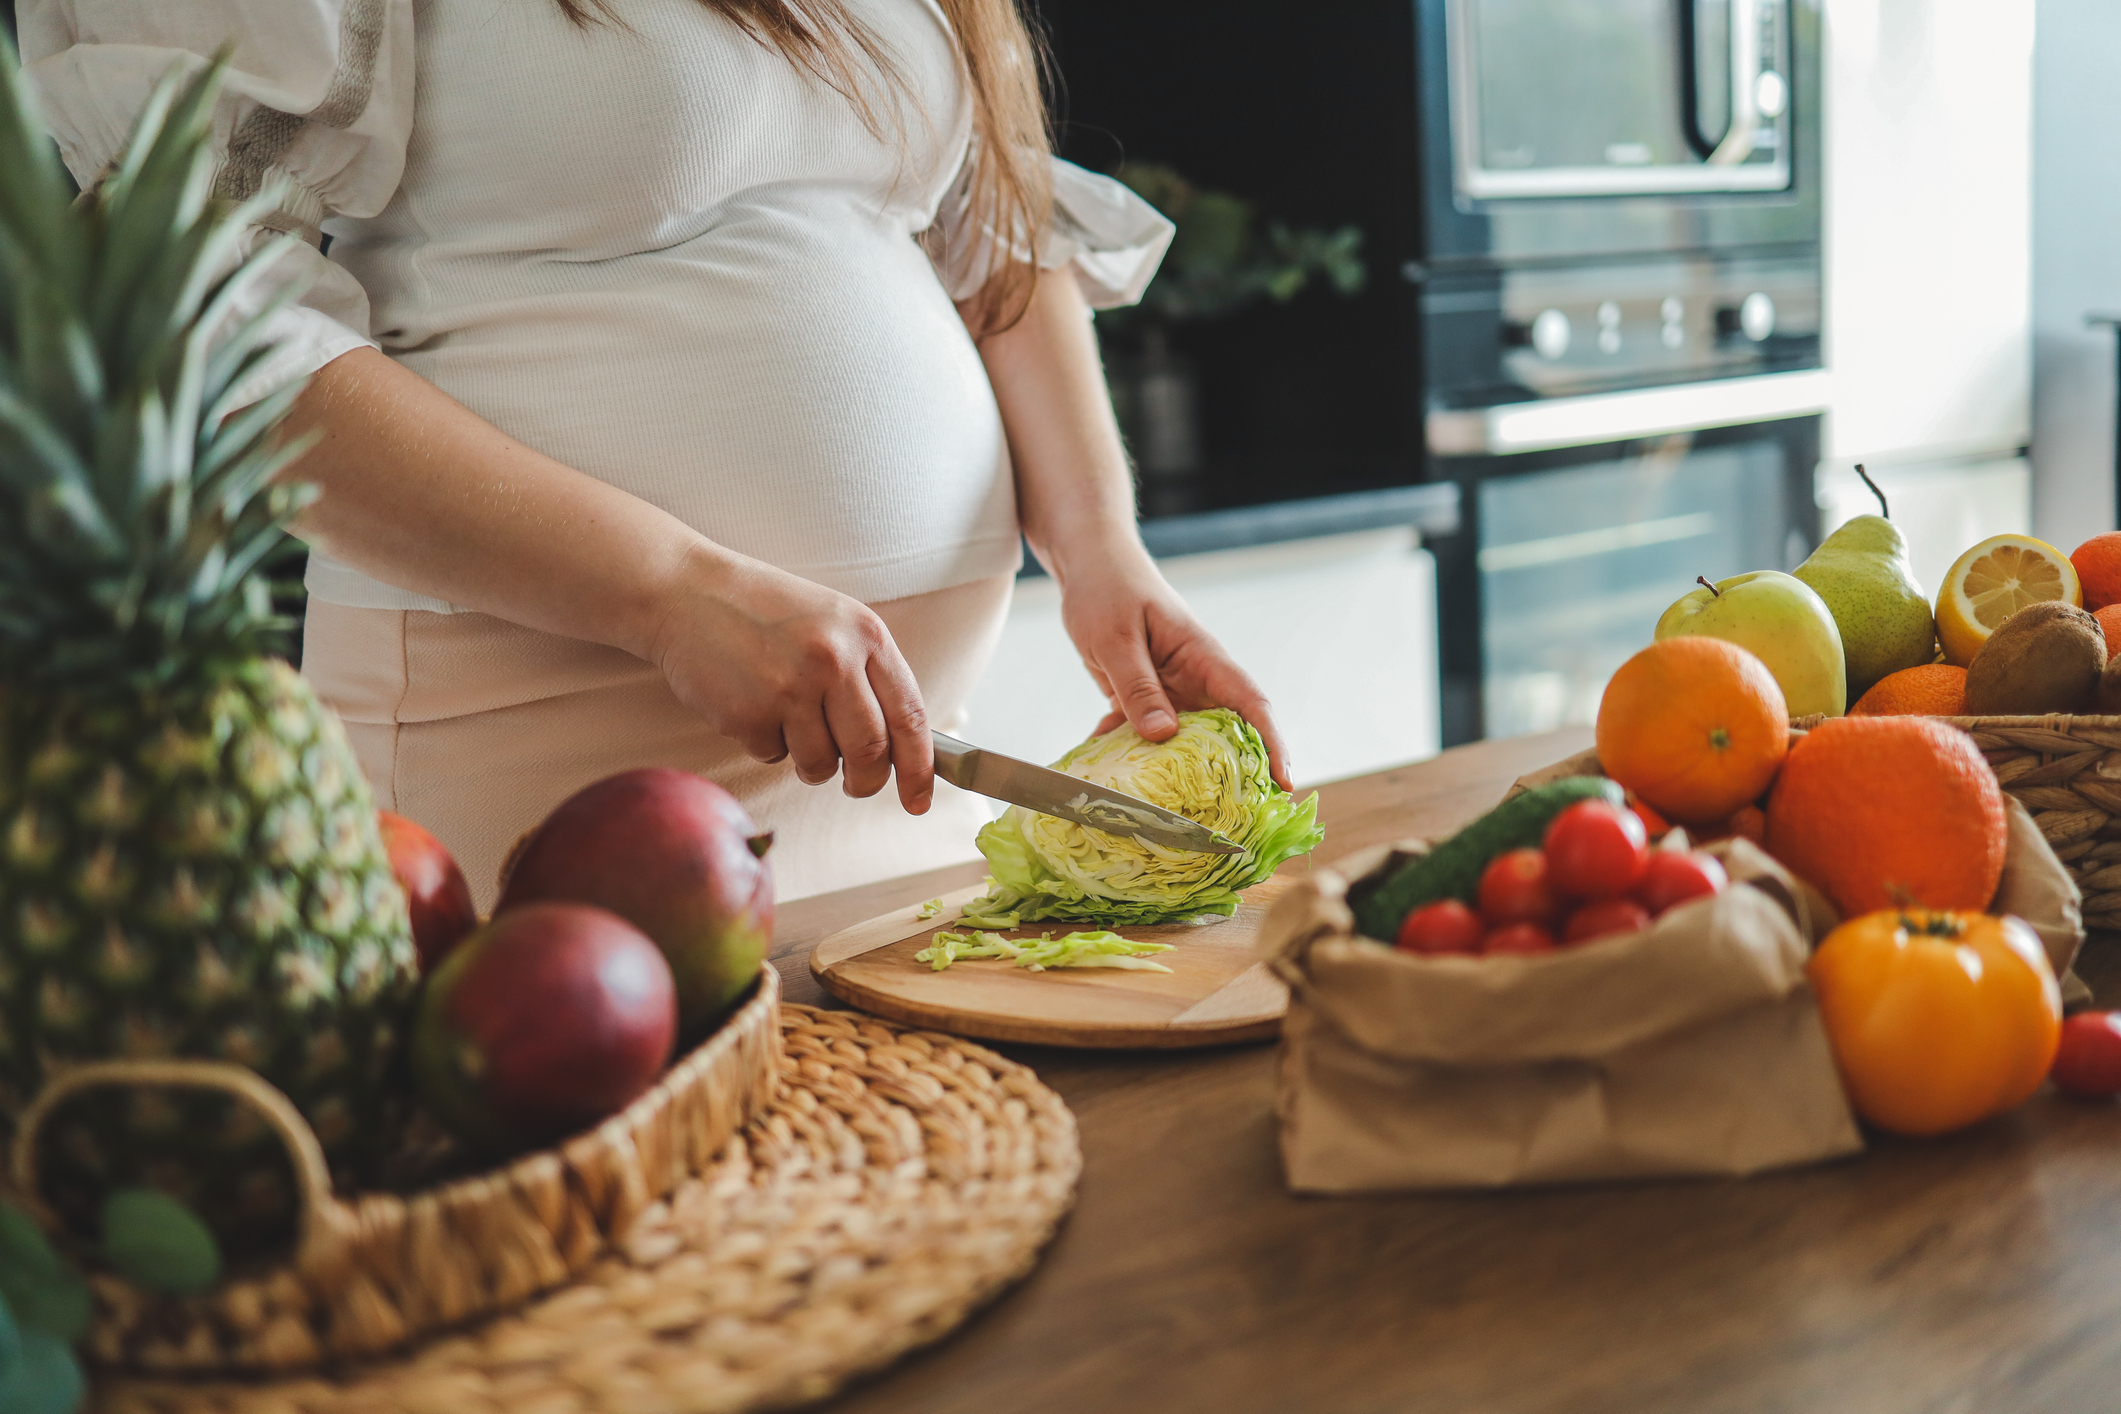 A pregnant woman is seen from the neck down, creating a salad at a counter full of fresh food